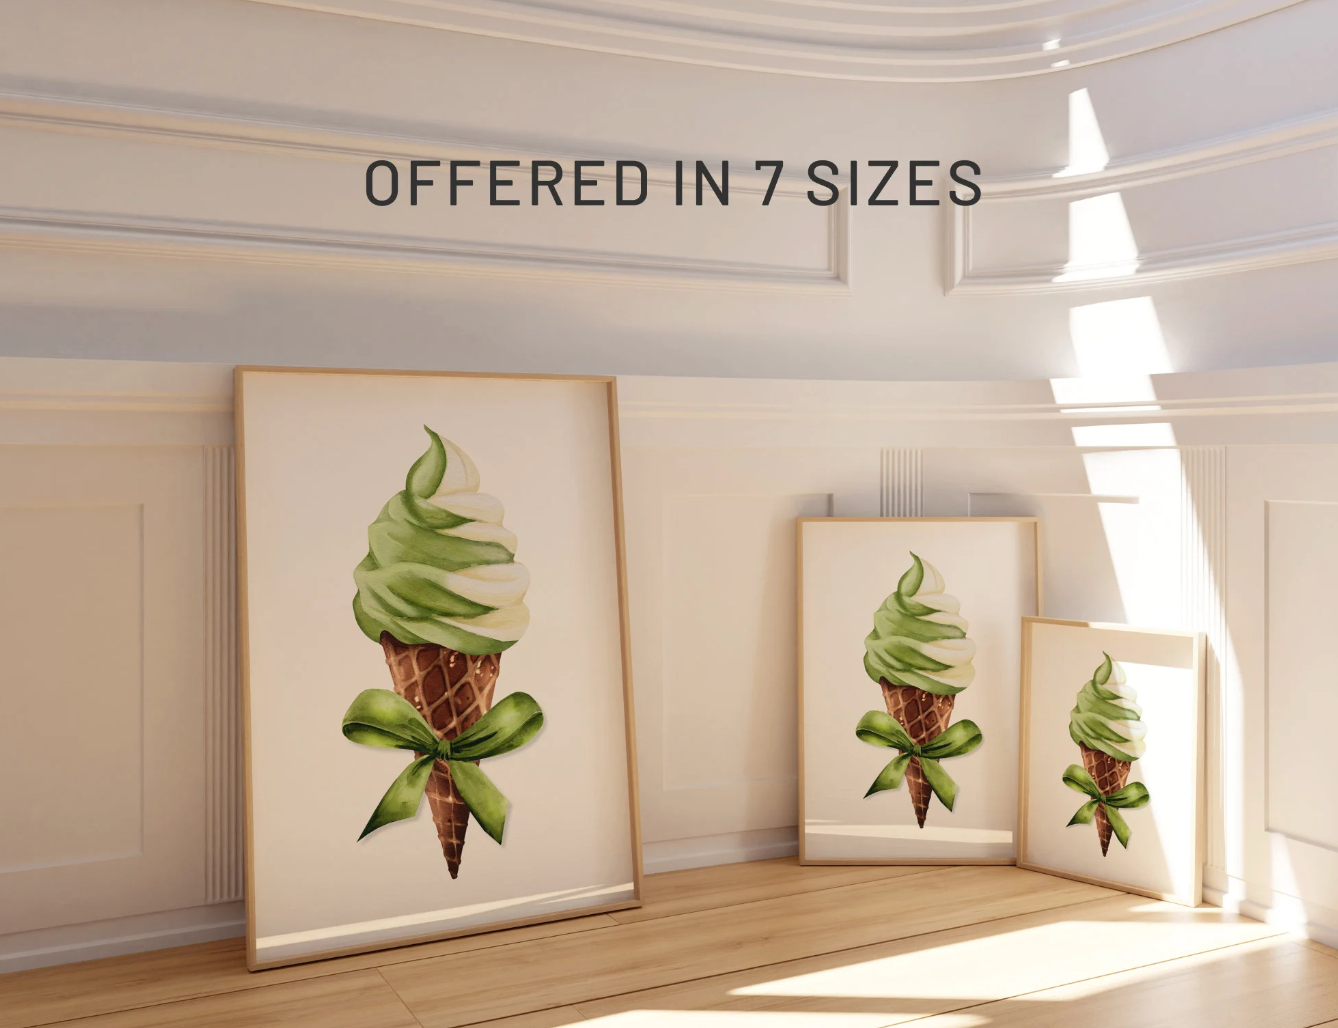 Green Ice Cream with Bow Poster Print